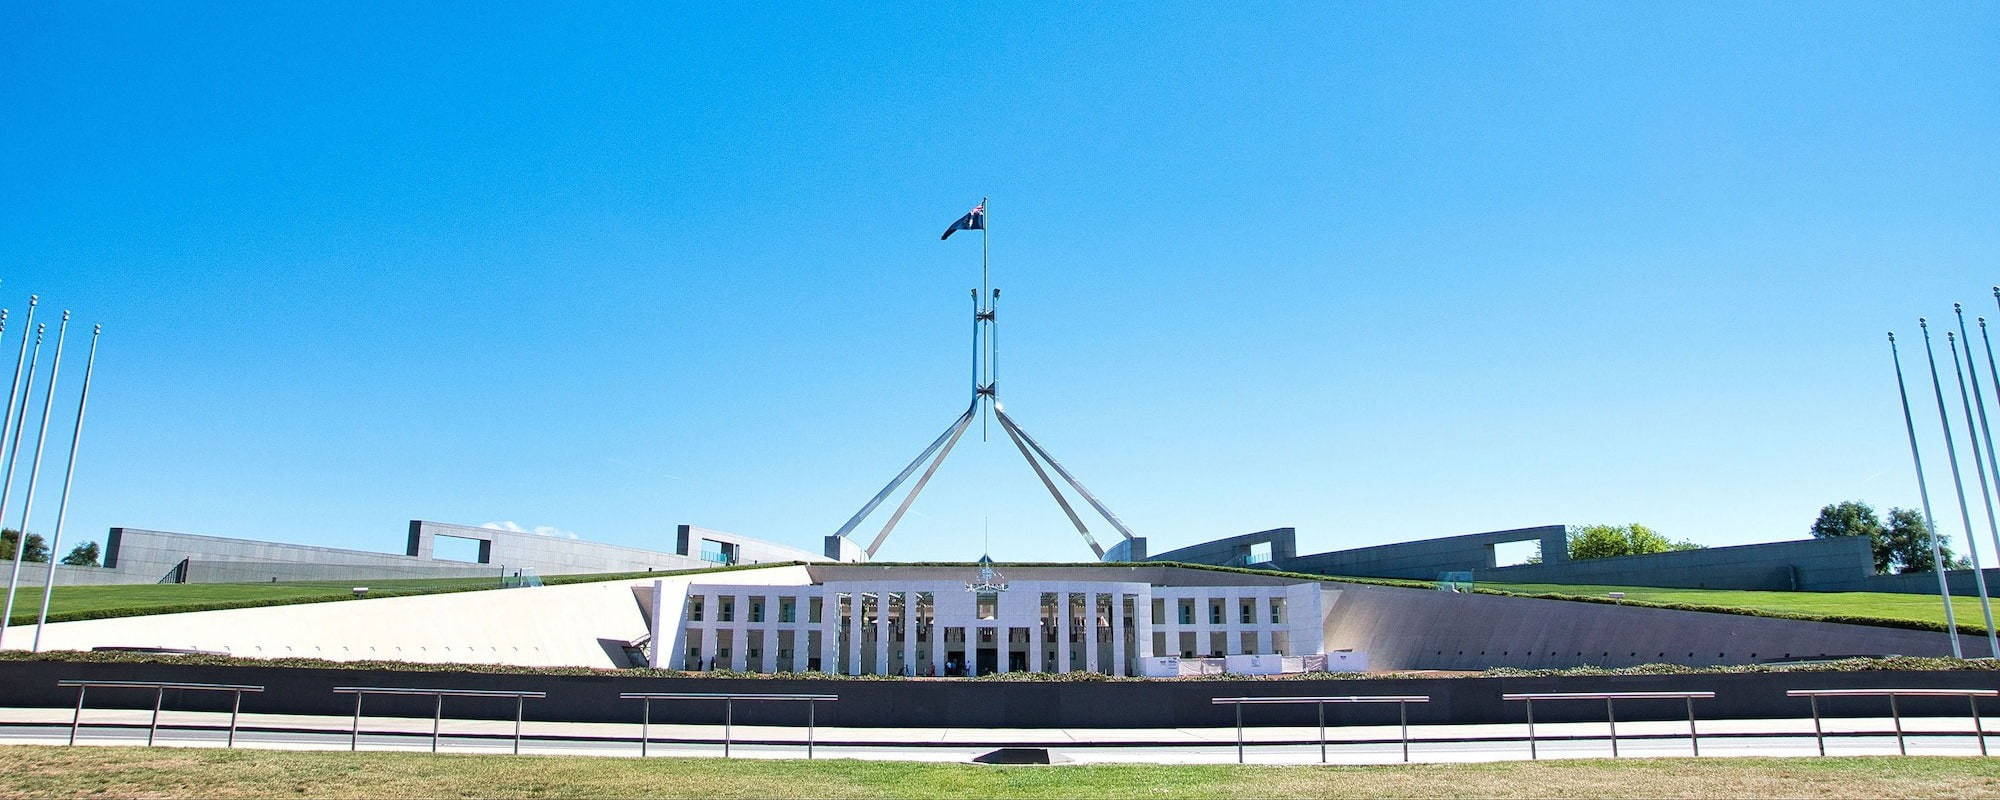 Canberra Australia, parliament house image where Vertical Scope Group (VSG) provide regular ICT and Cyber security services to government and corporate clients